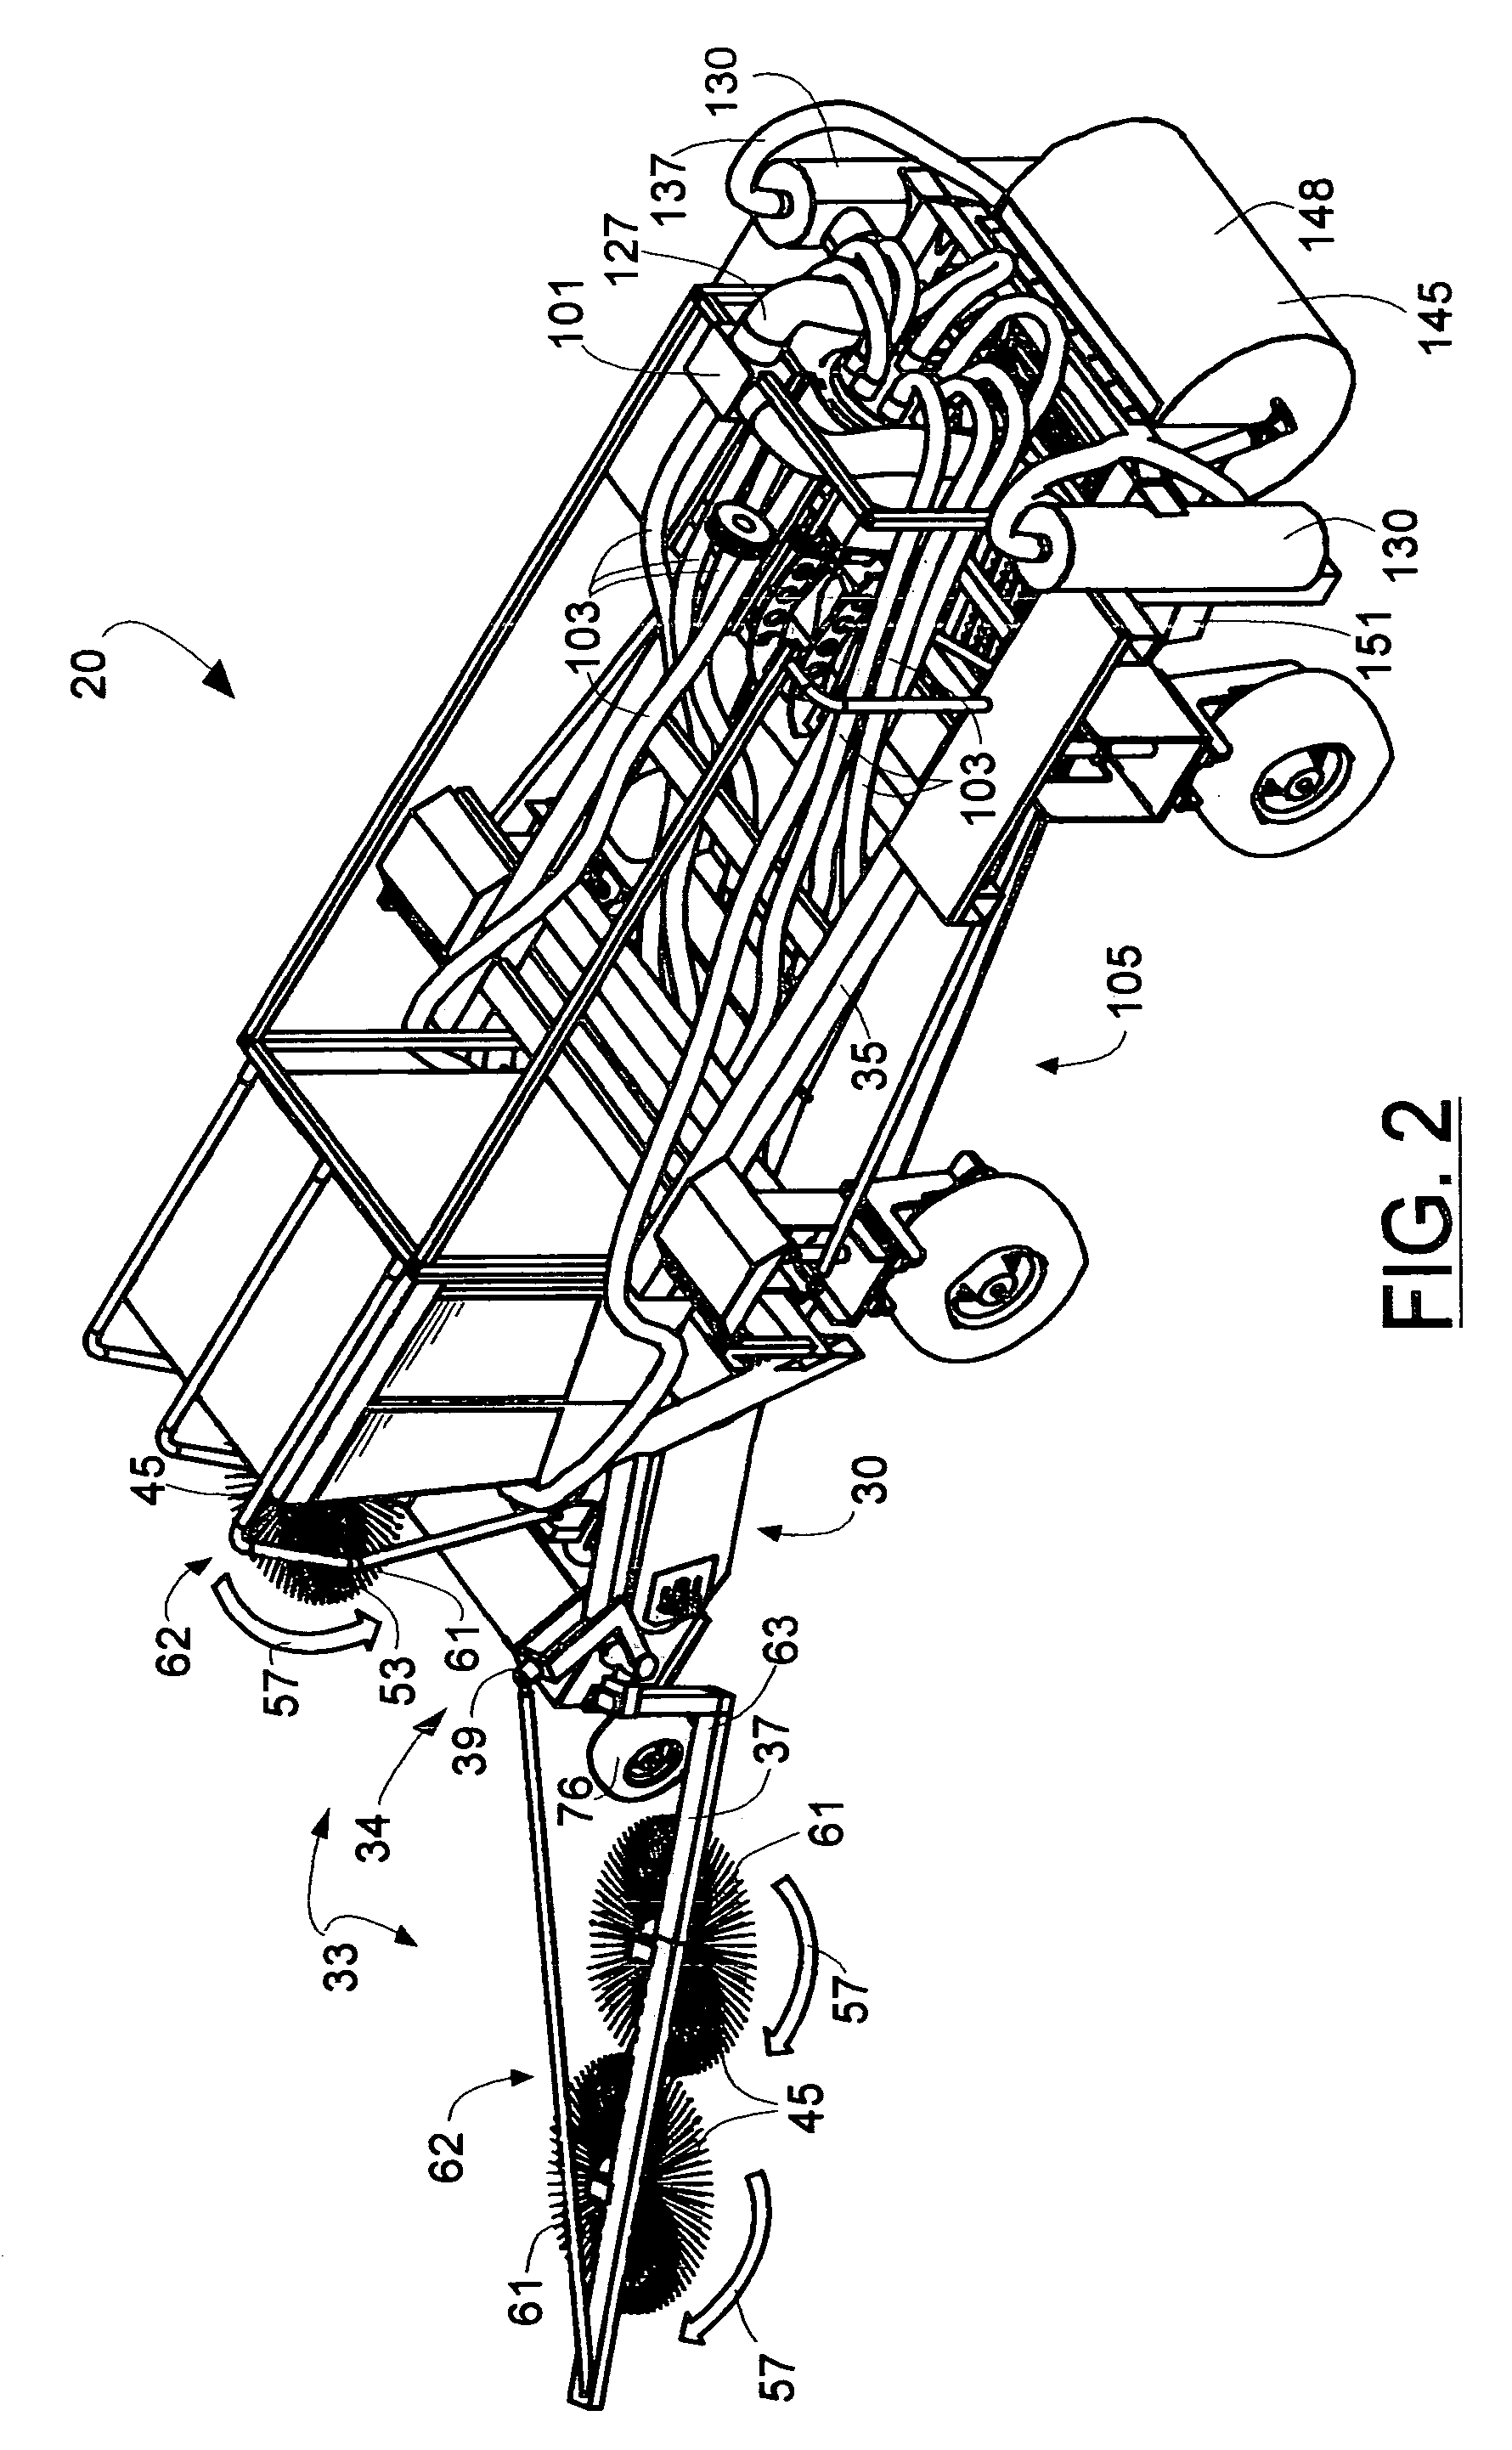 Method for retrieving and processing bulk harvested nuts and fruits